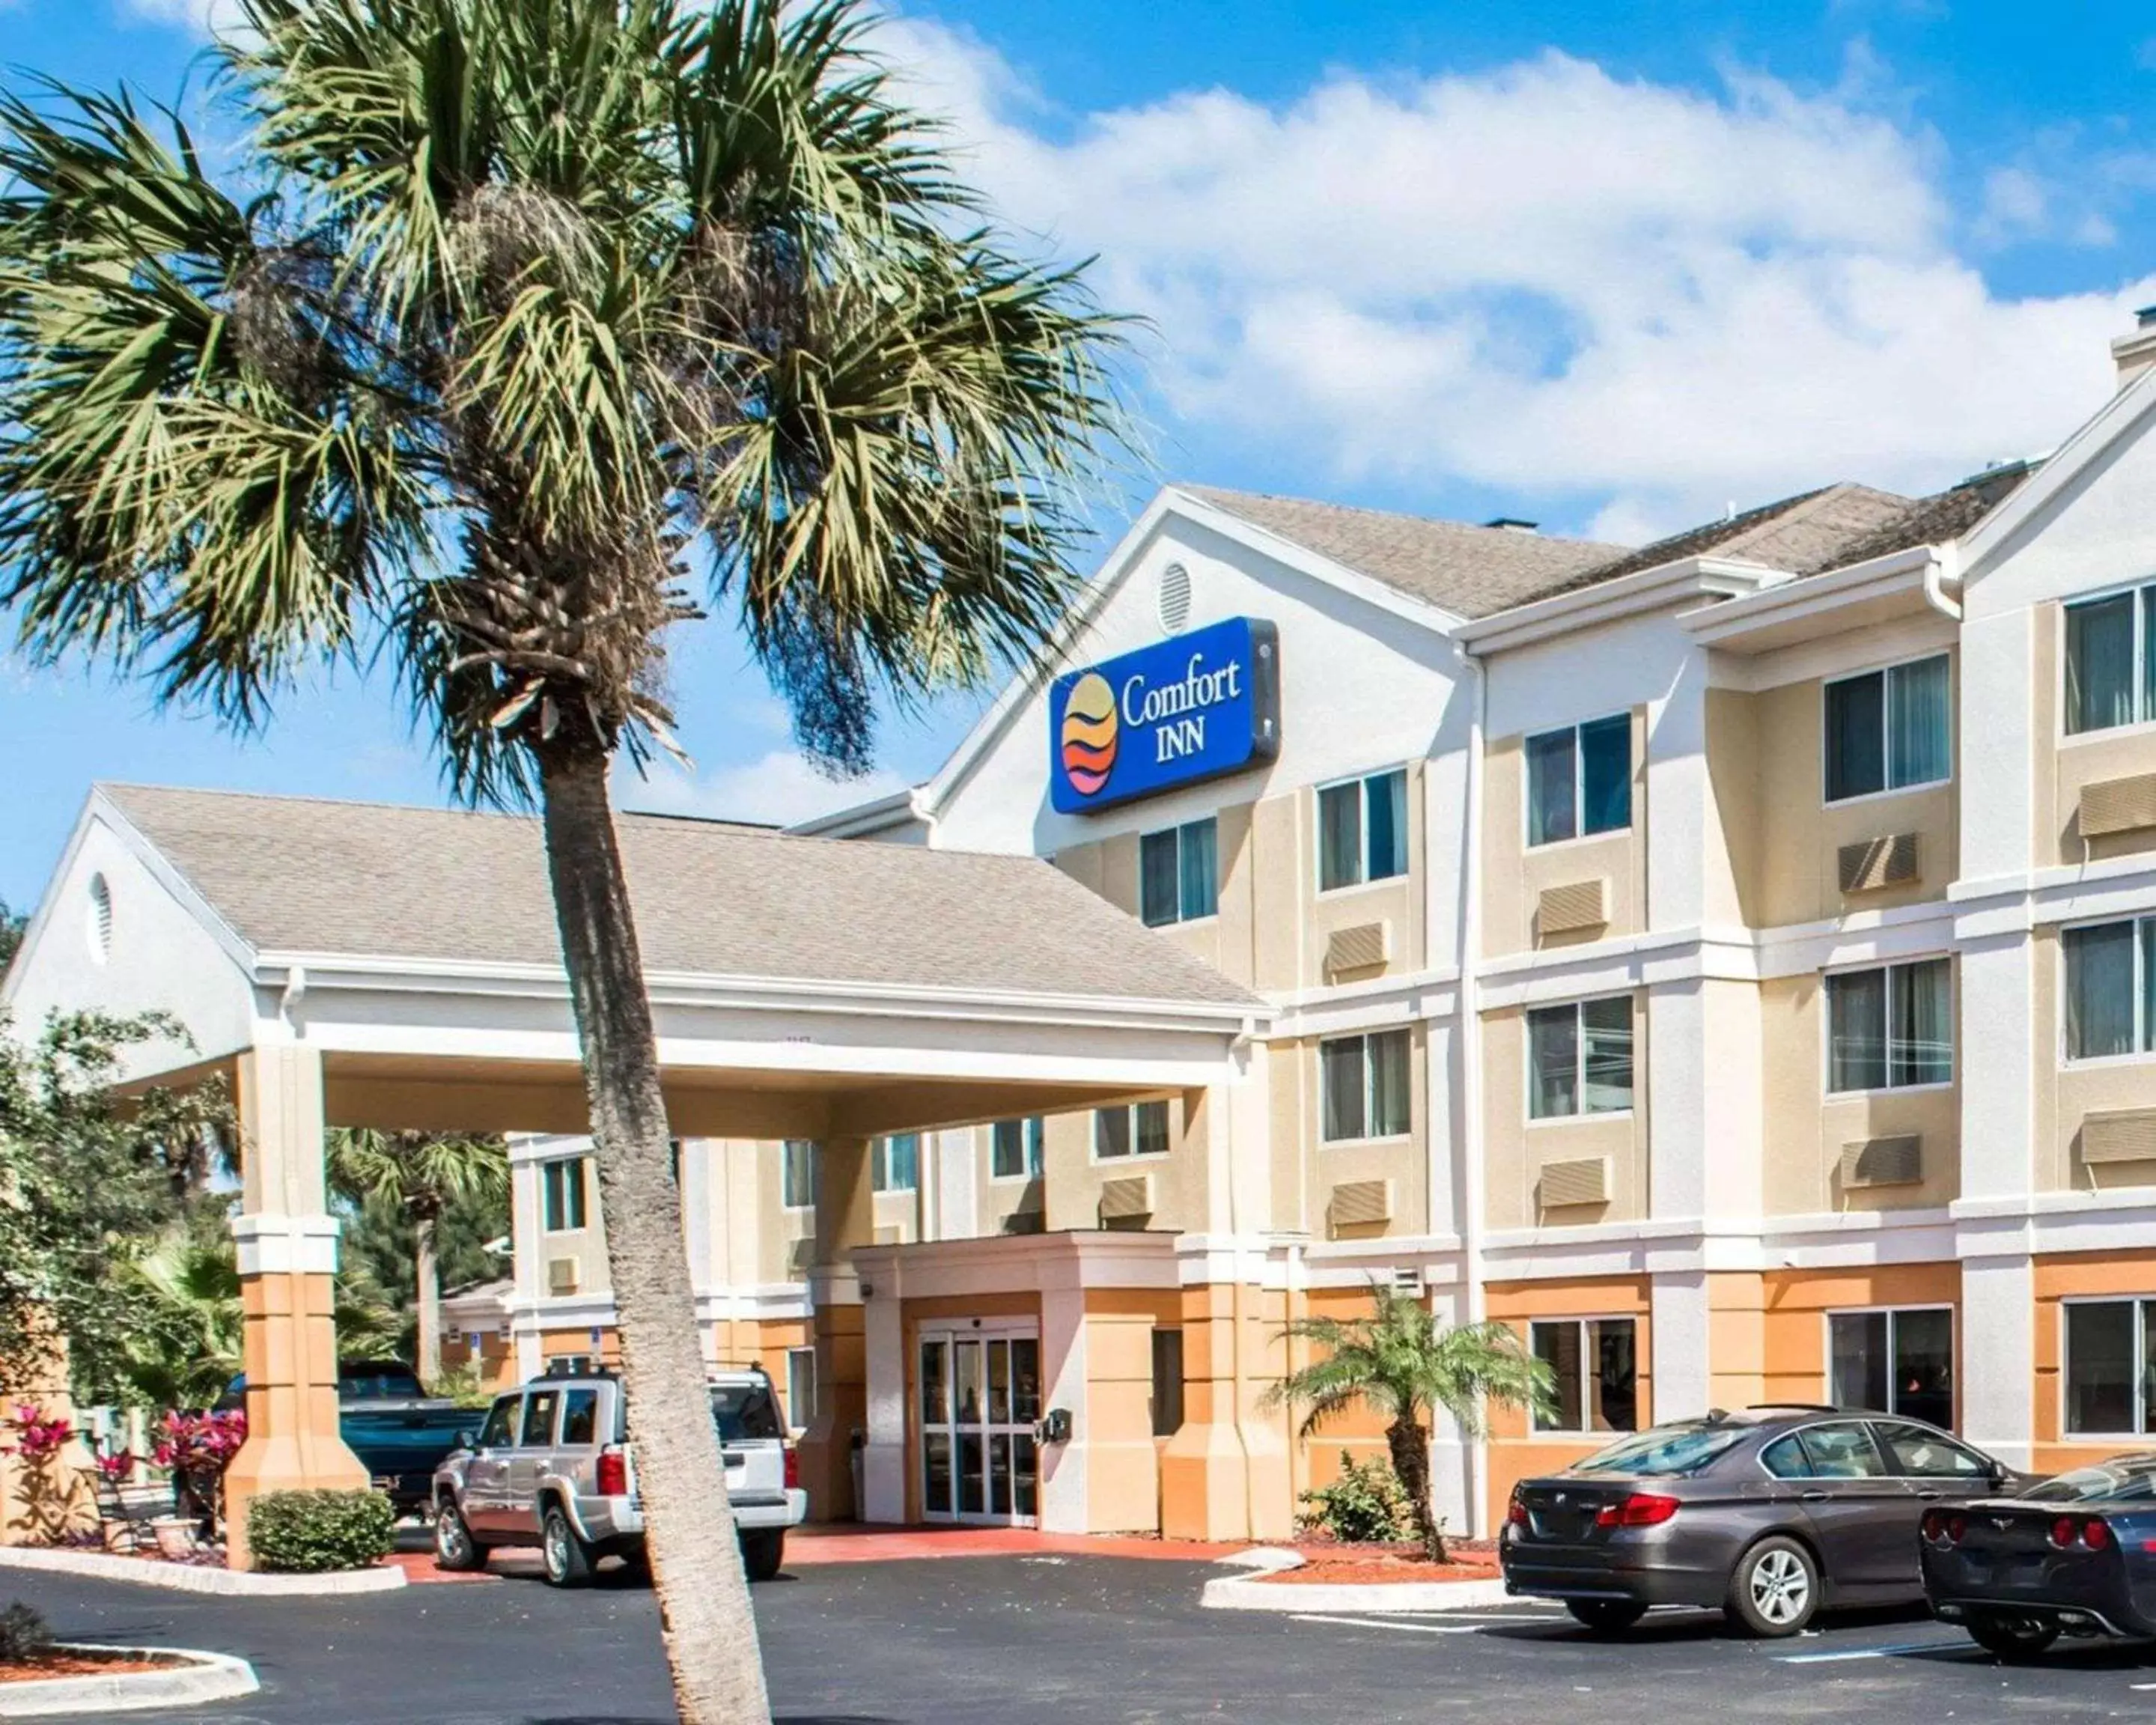 Property building in Comfort Inn Fort Myers Northeast